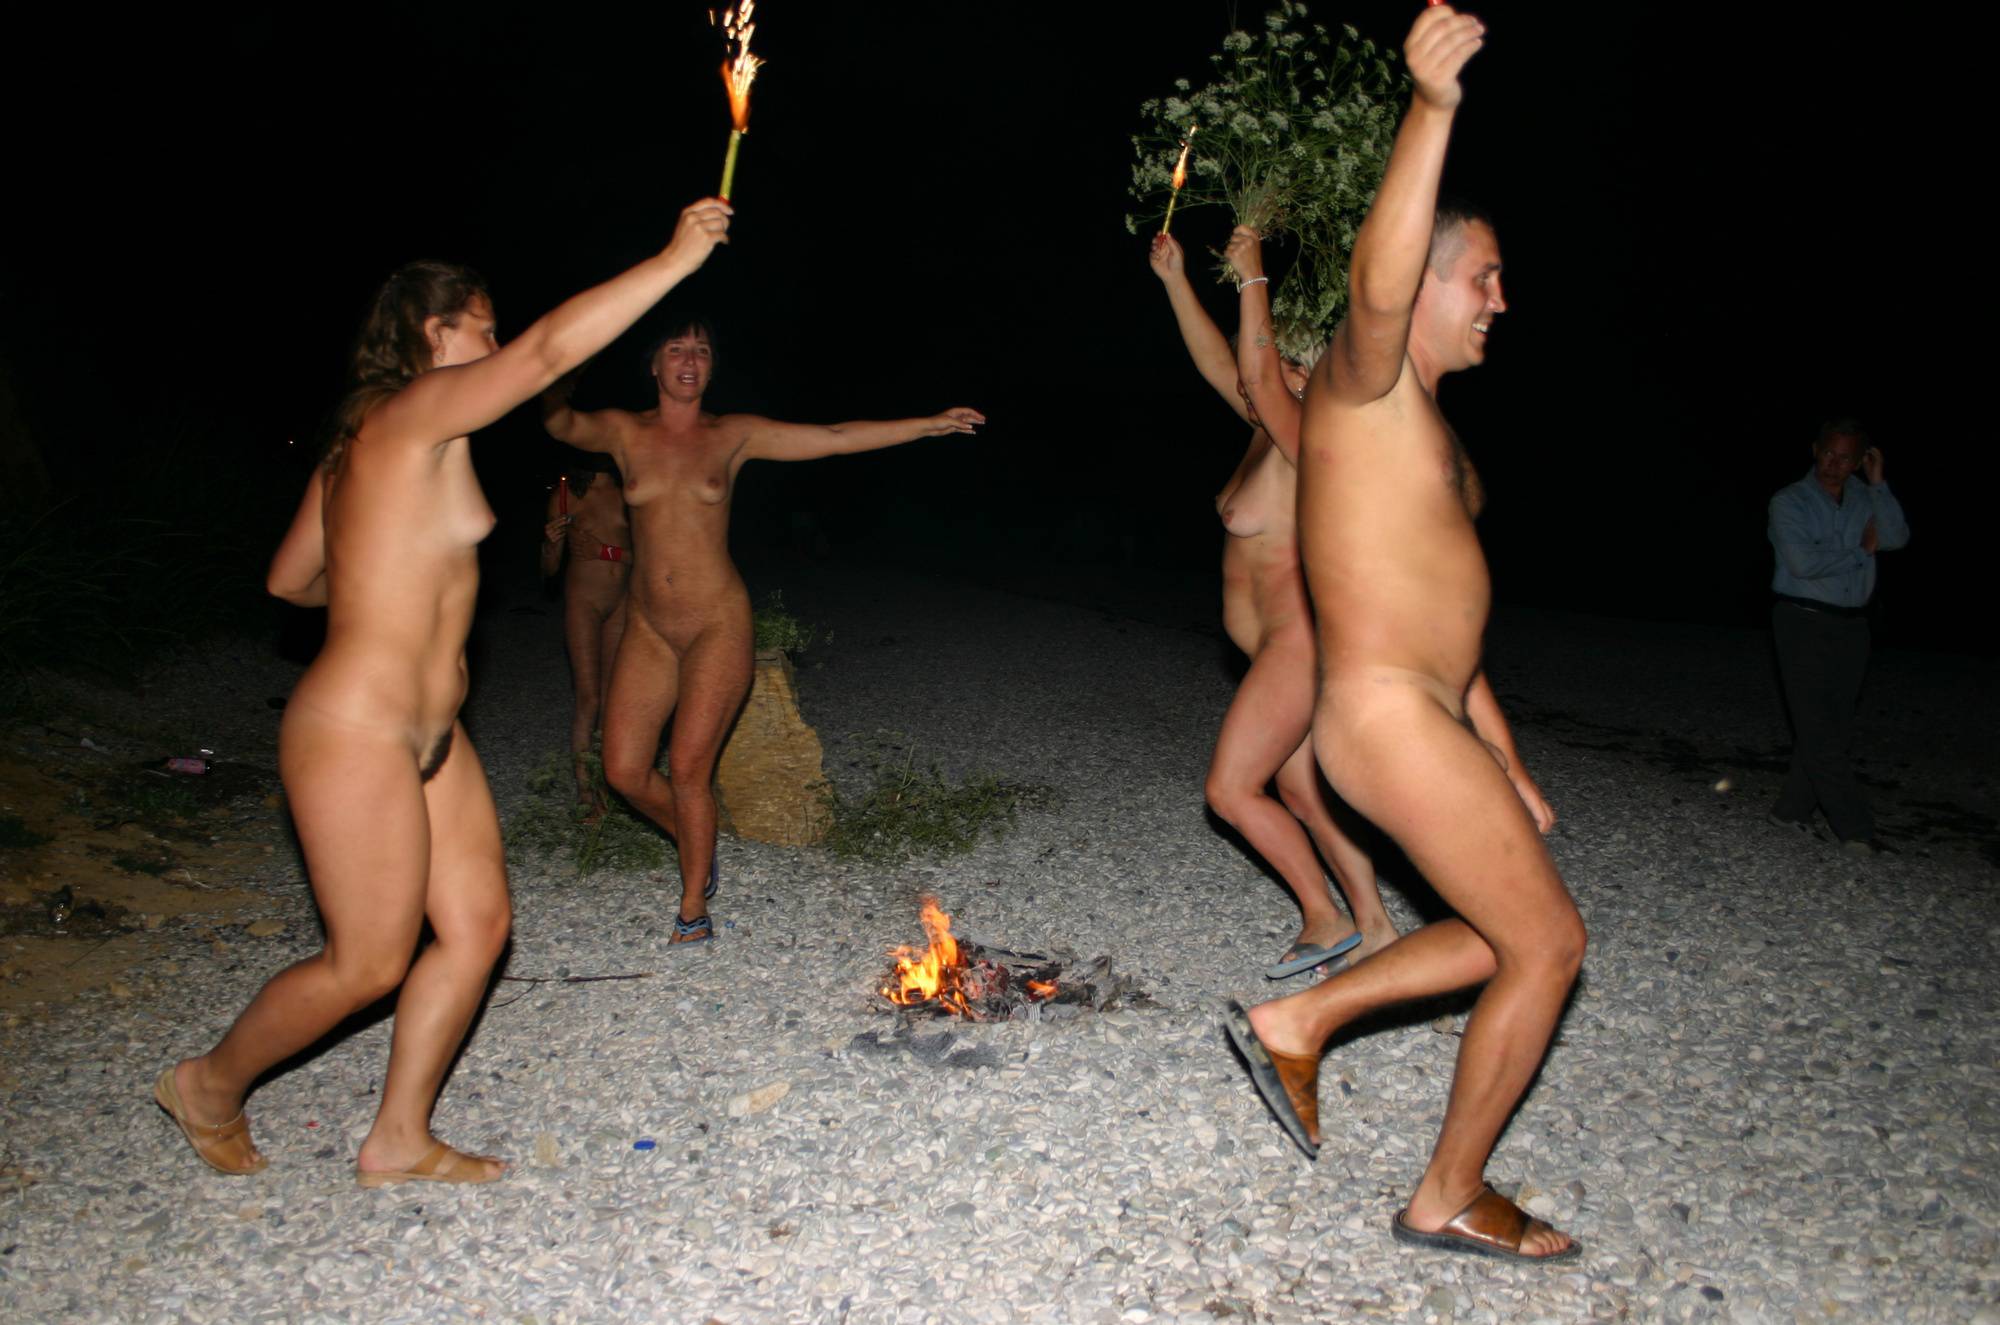 Purenudism Photos Fire and Bow Night Dancing - 3